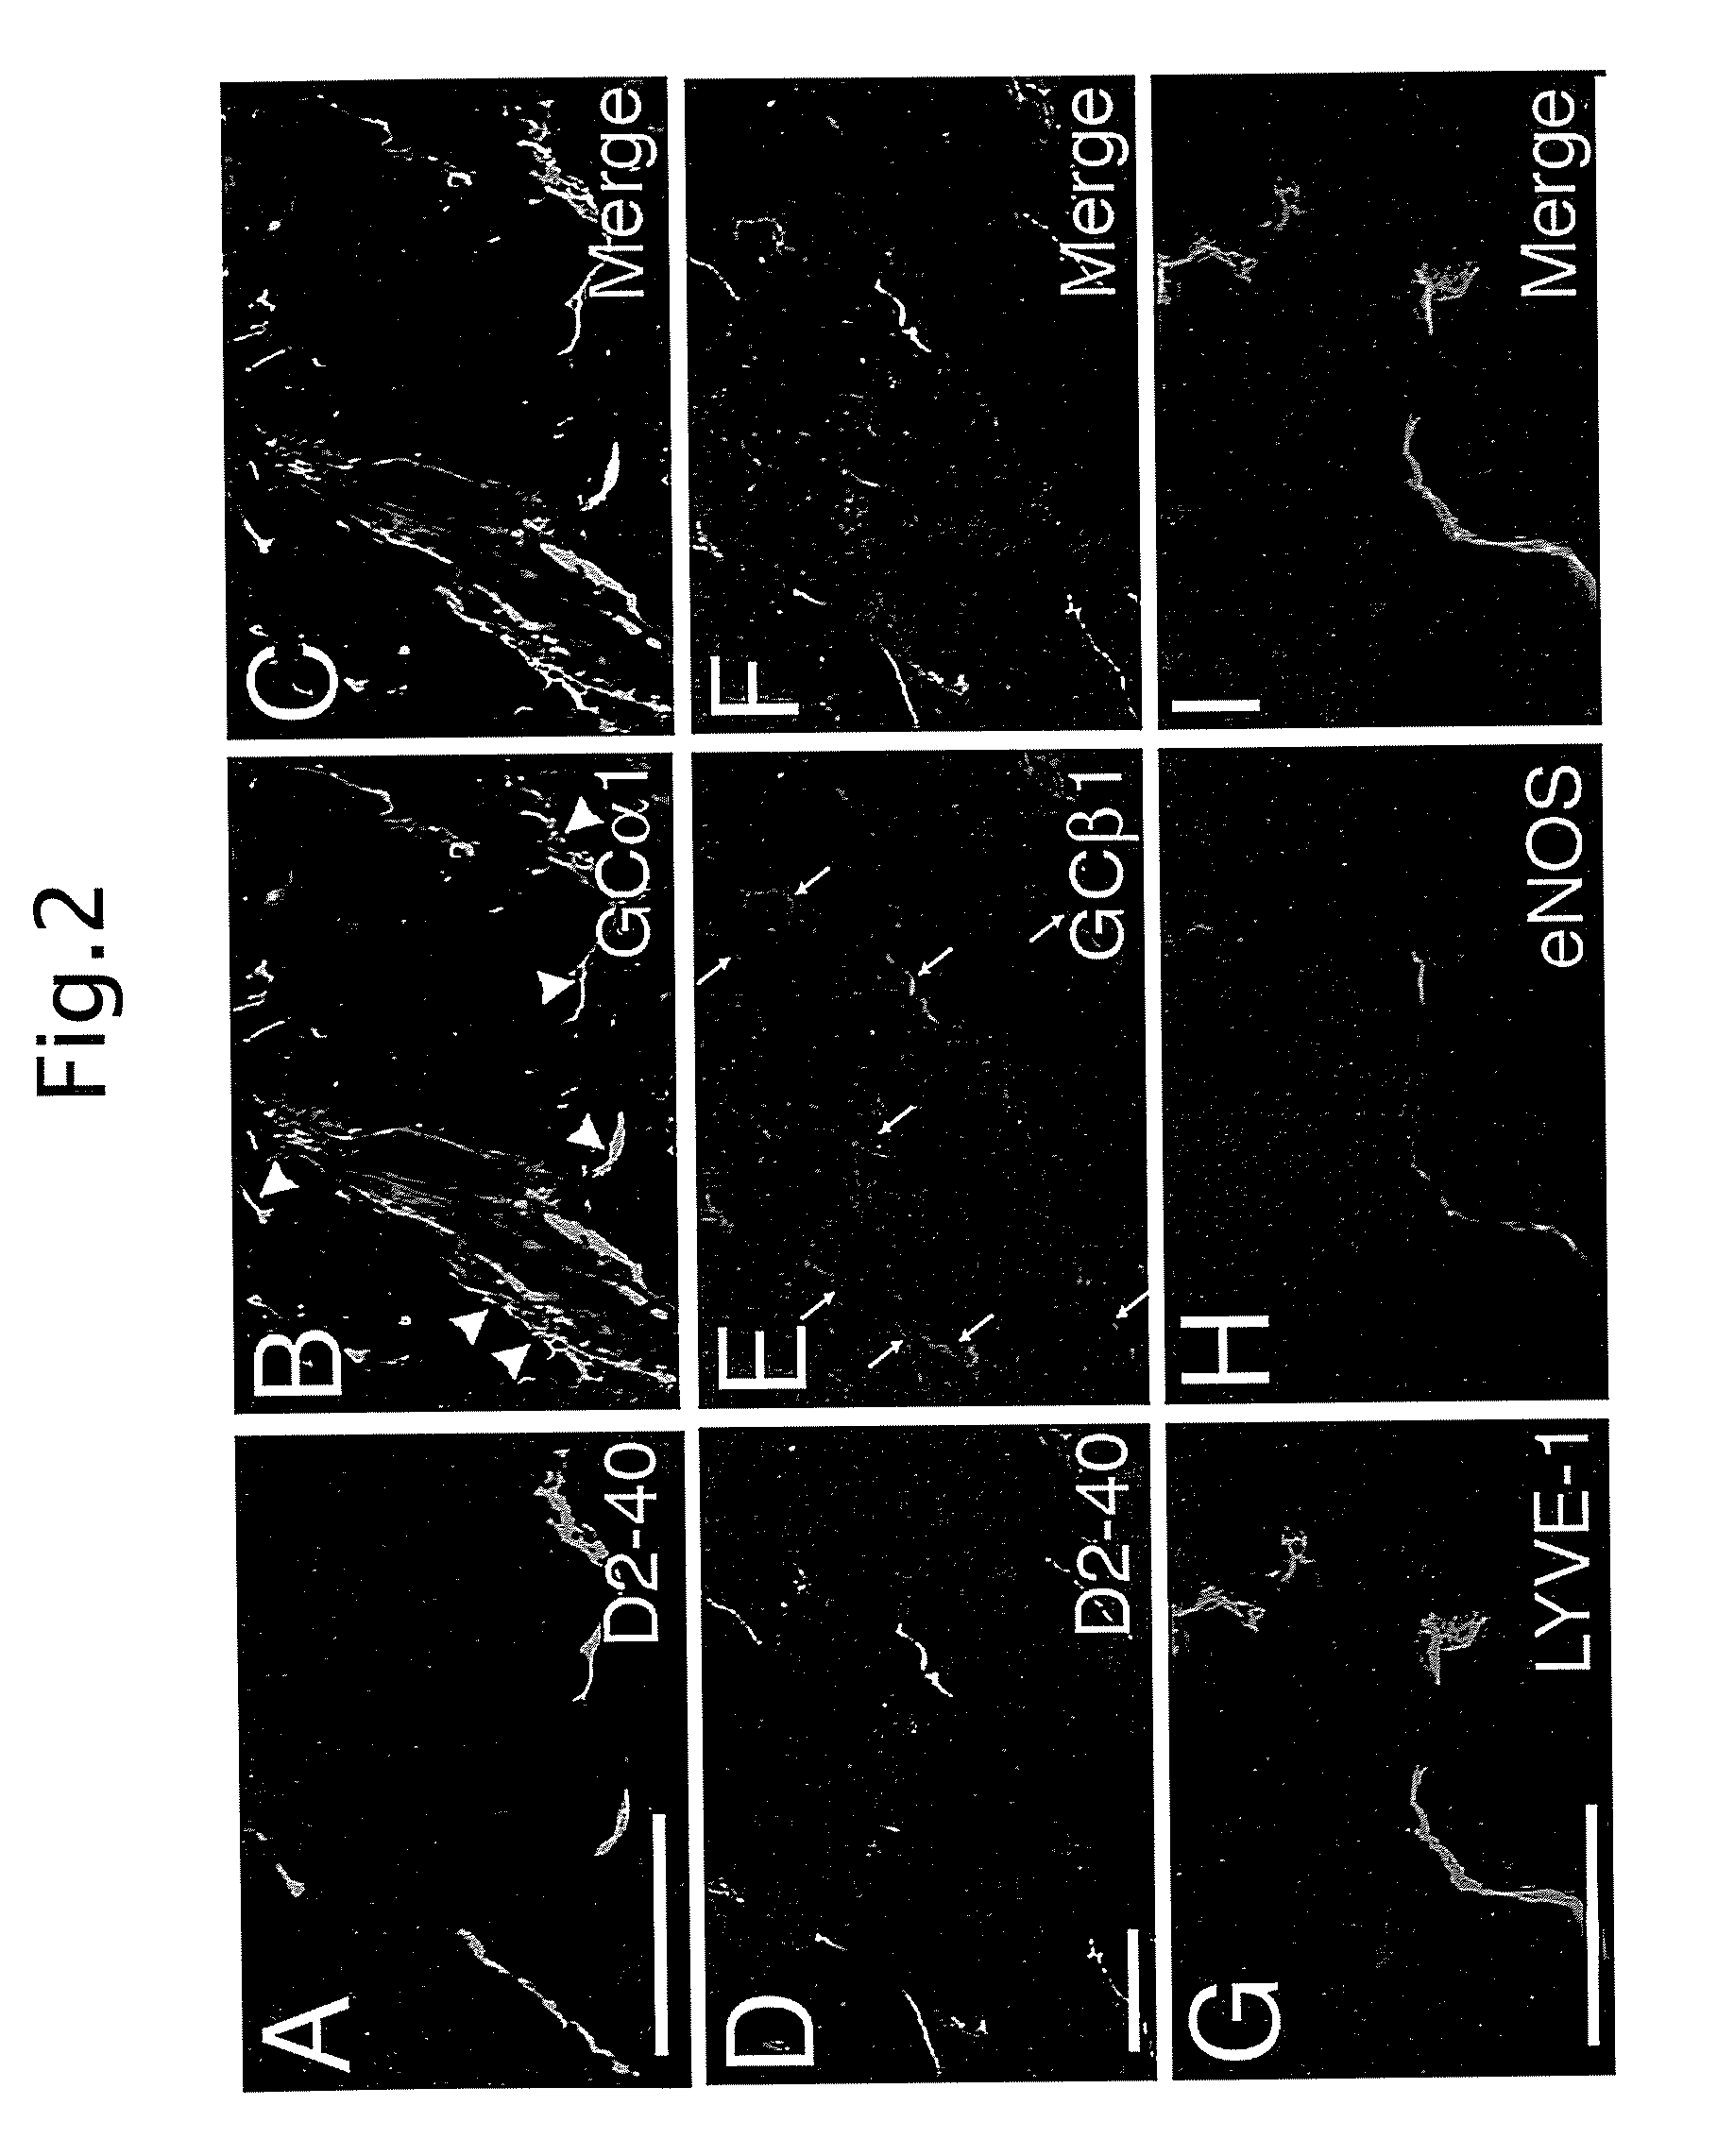 Method for inhibiting lymphangiogenesis and inflammation